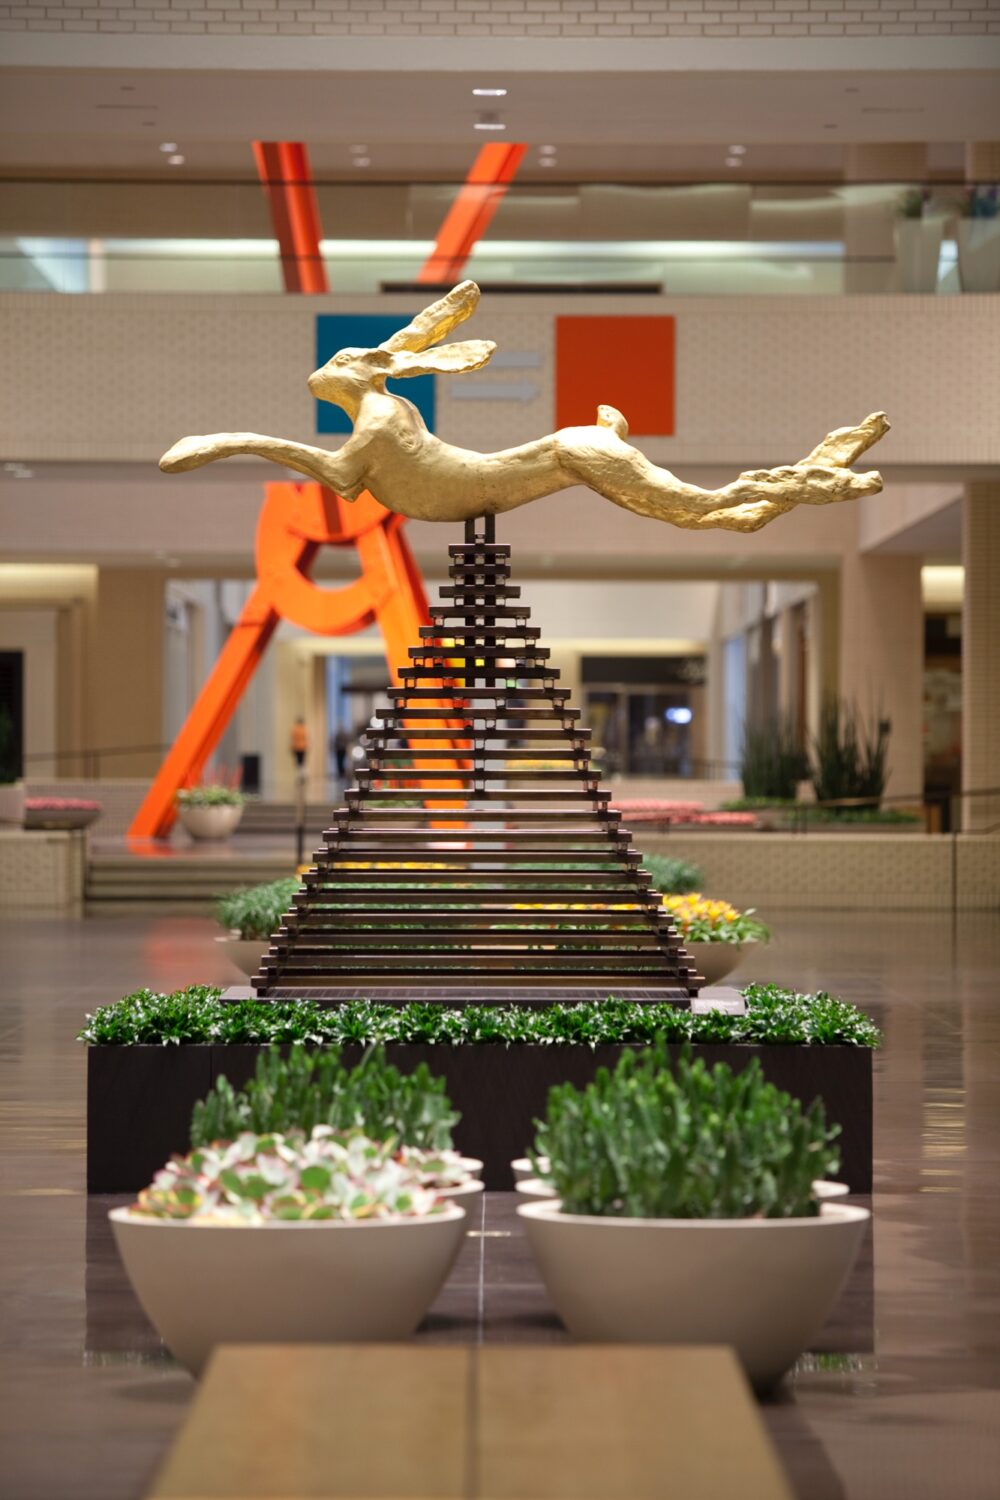 Photography by Nancy A. Nasher and David J. Haemisegger Collection. Large Leaping Hare, 1982, at NorthPark Center, Dallas, TX